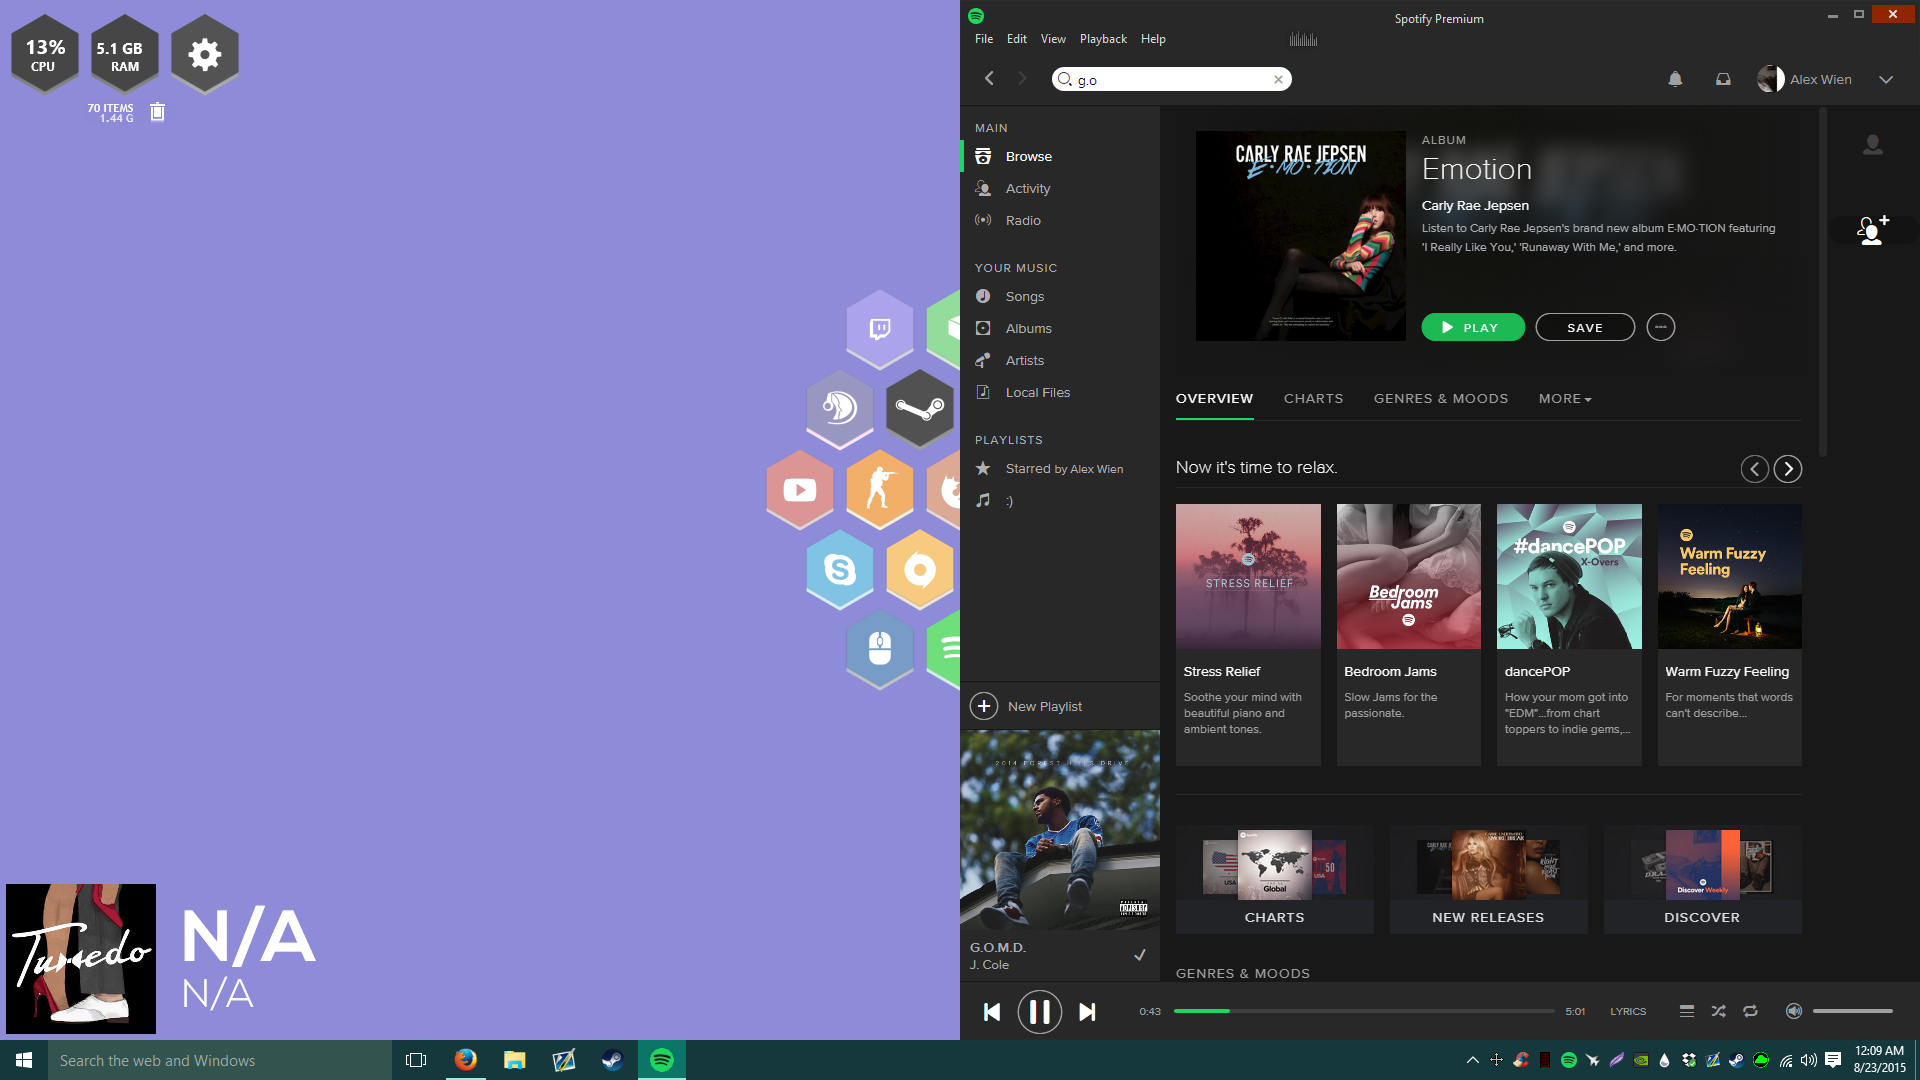 visualizer for spotify 2015